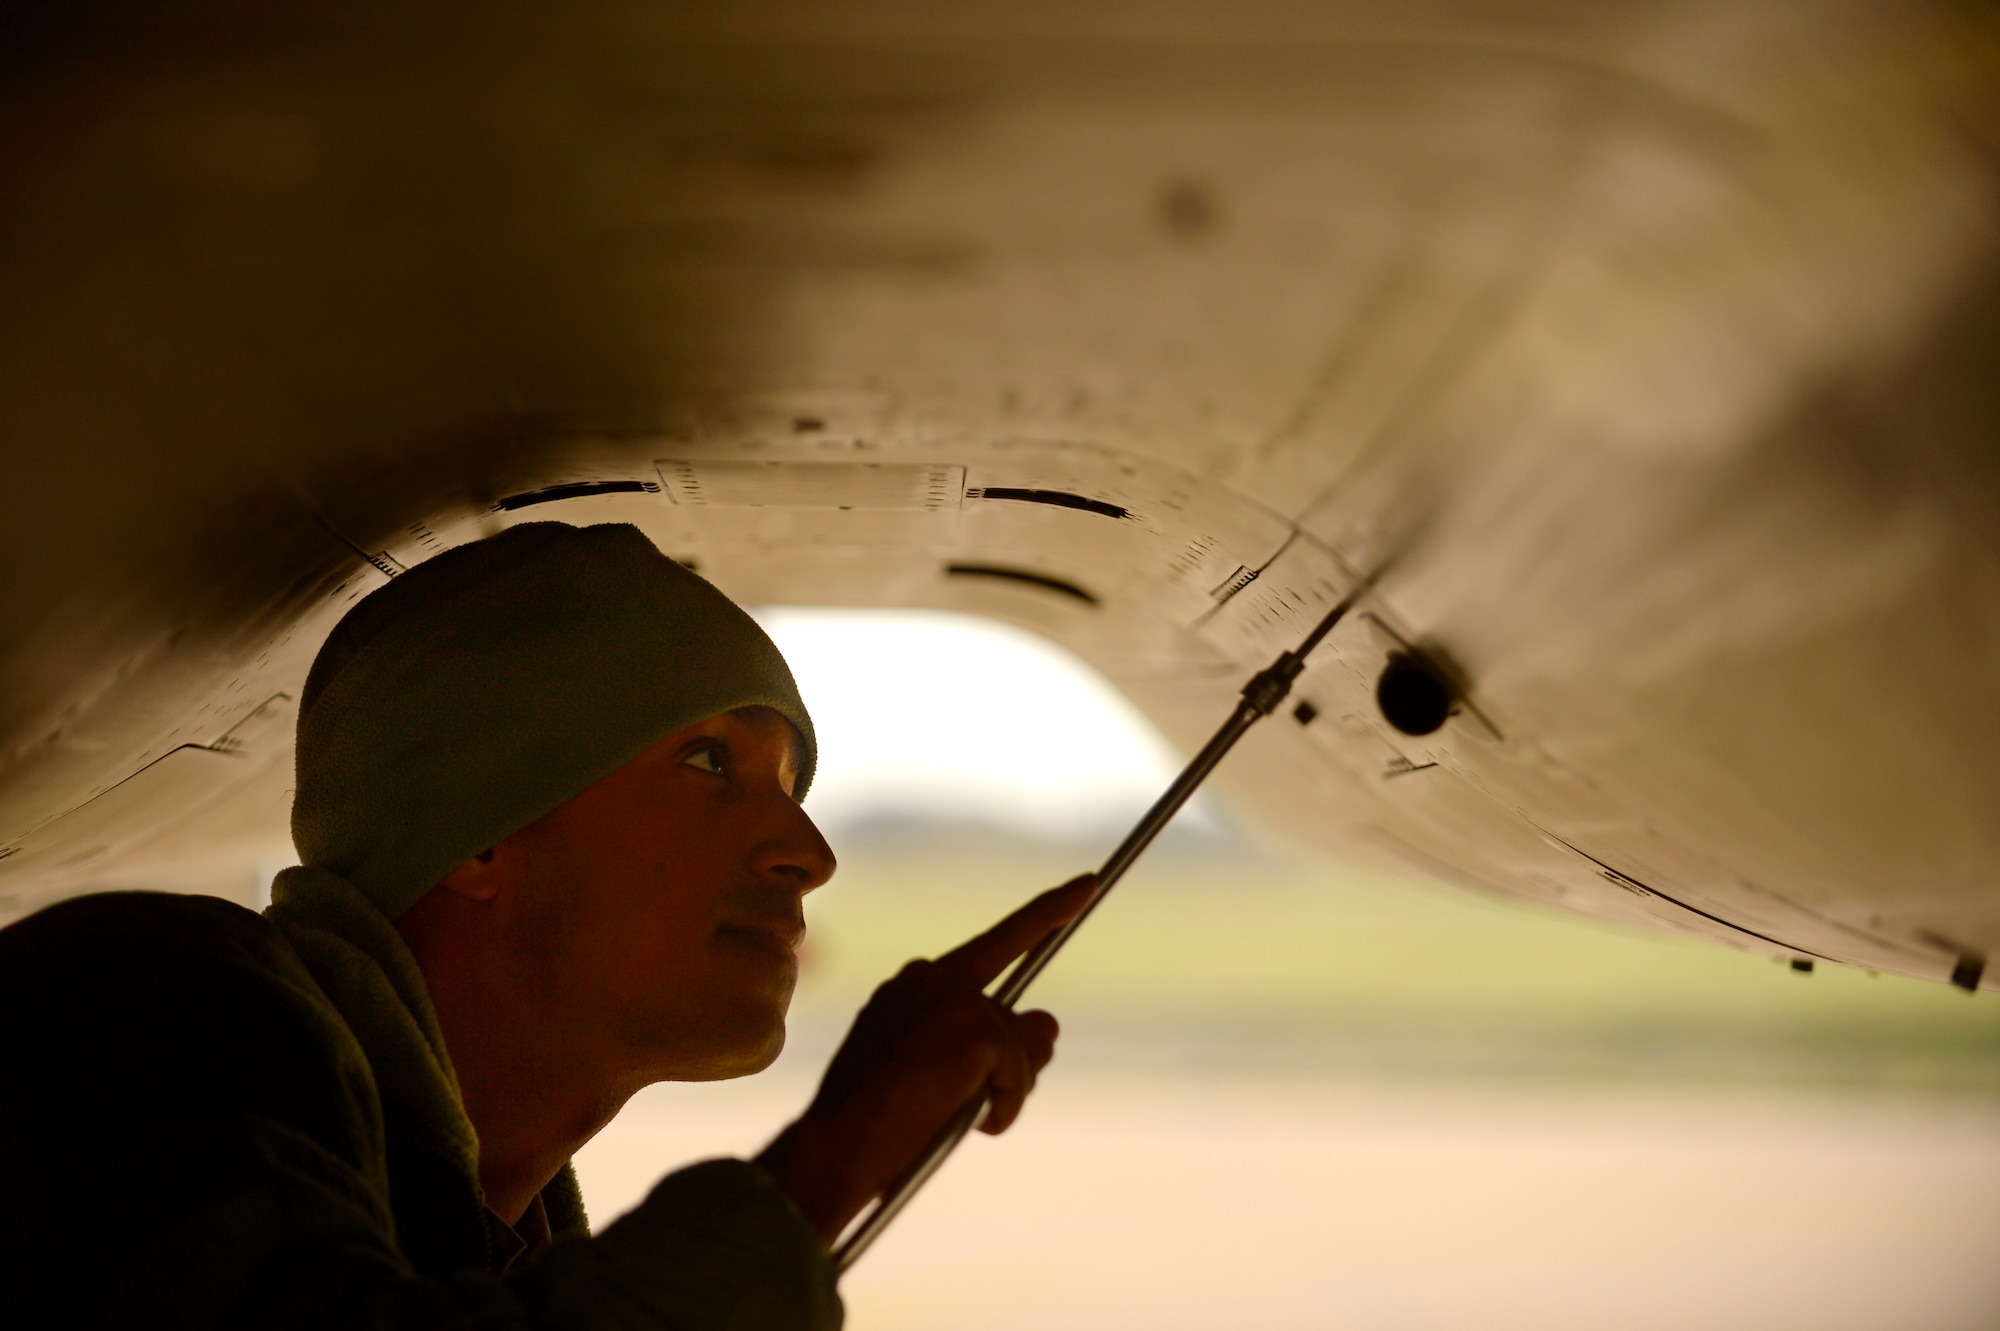 An F-15C Eagle crew chief performs maintenance at Leeuwarden Air Base, Netherlands, March 24, 2017. F-15C's from the Lousiana and Florida Air National Guard's 159th Expeditionary Fighter Squadron deployed to Europe to participate in a Theater Security Package. These F-15s will conduct training alongside NATO allies to strengthen interoperability and to demonstrate U.S. commitment to the security and stability of Europe. (U.S. Air Force photo by Tech. Sgt. Staci Miller)
	


	
